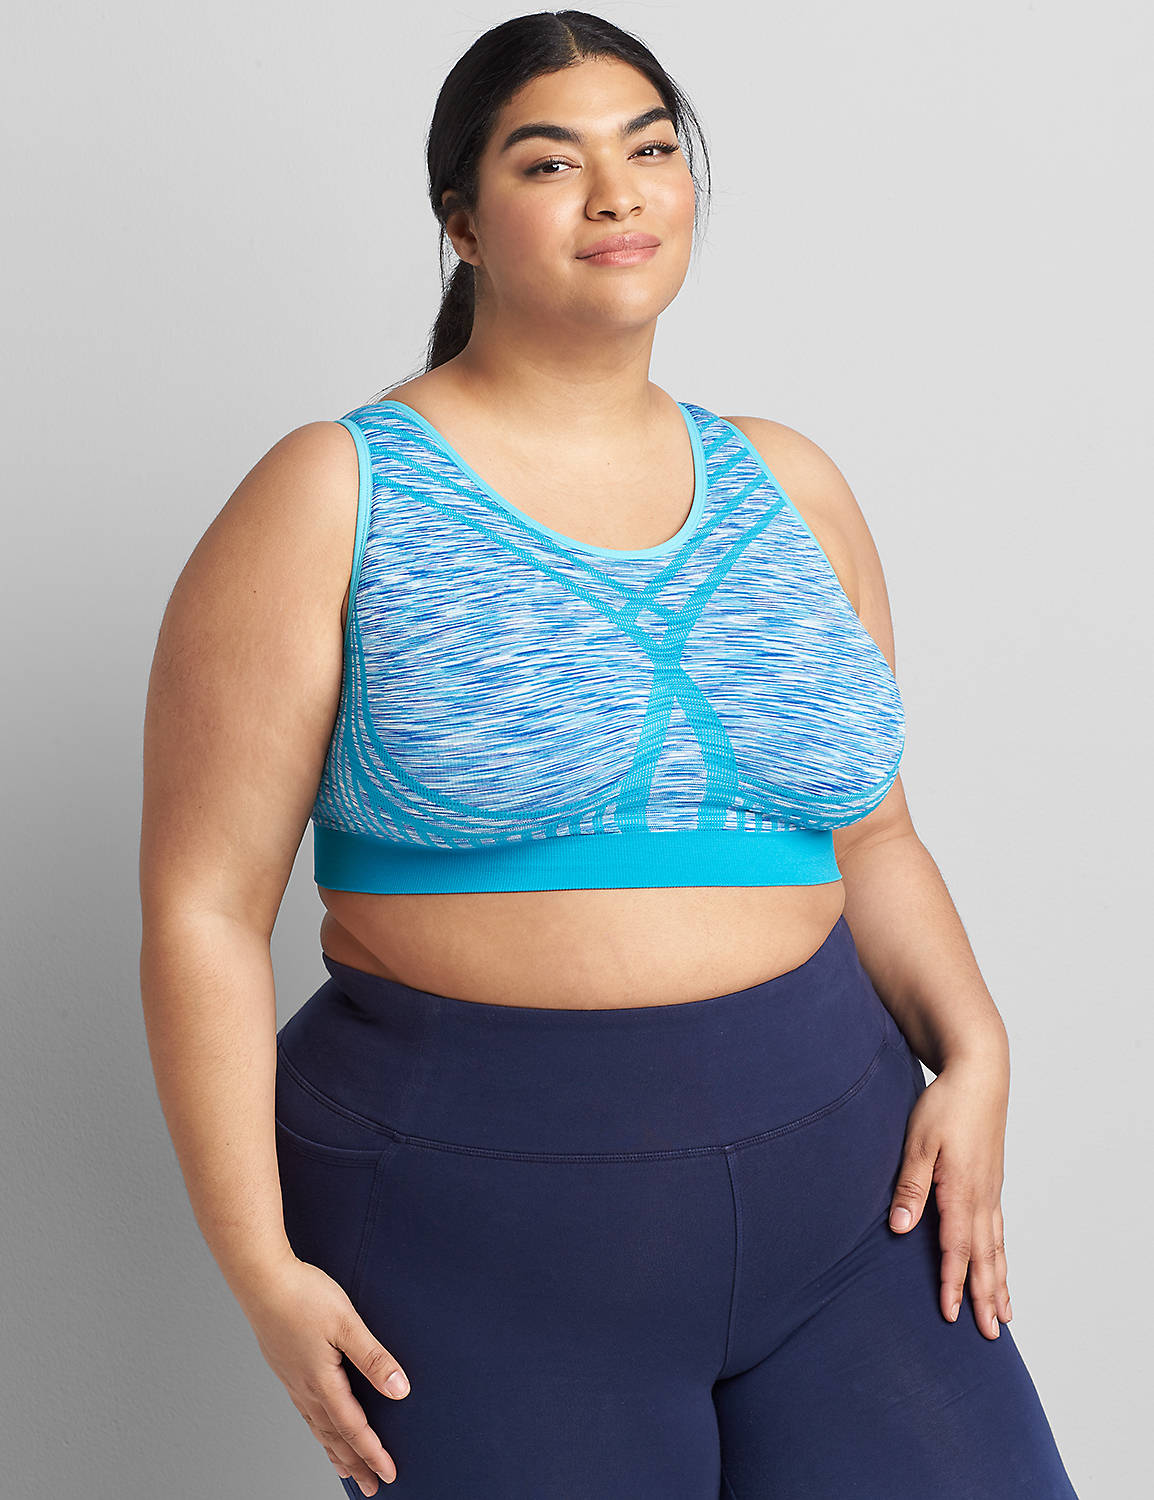 1119725-S Zoned Seamless Space Dye Contrast Sport Bra:Blue space dye - seamless:10/12 Product Image 1